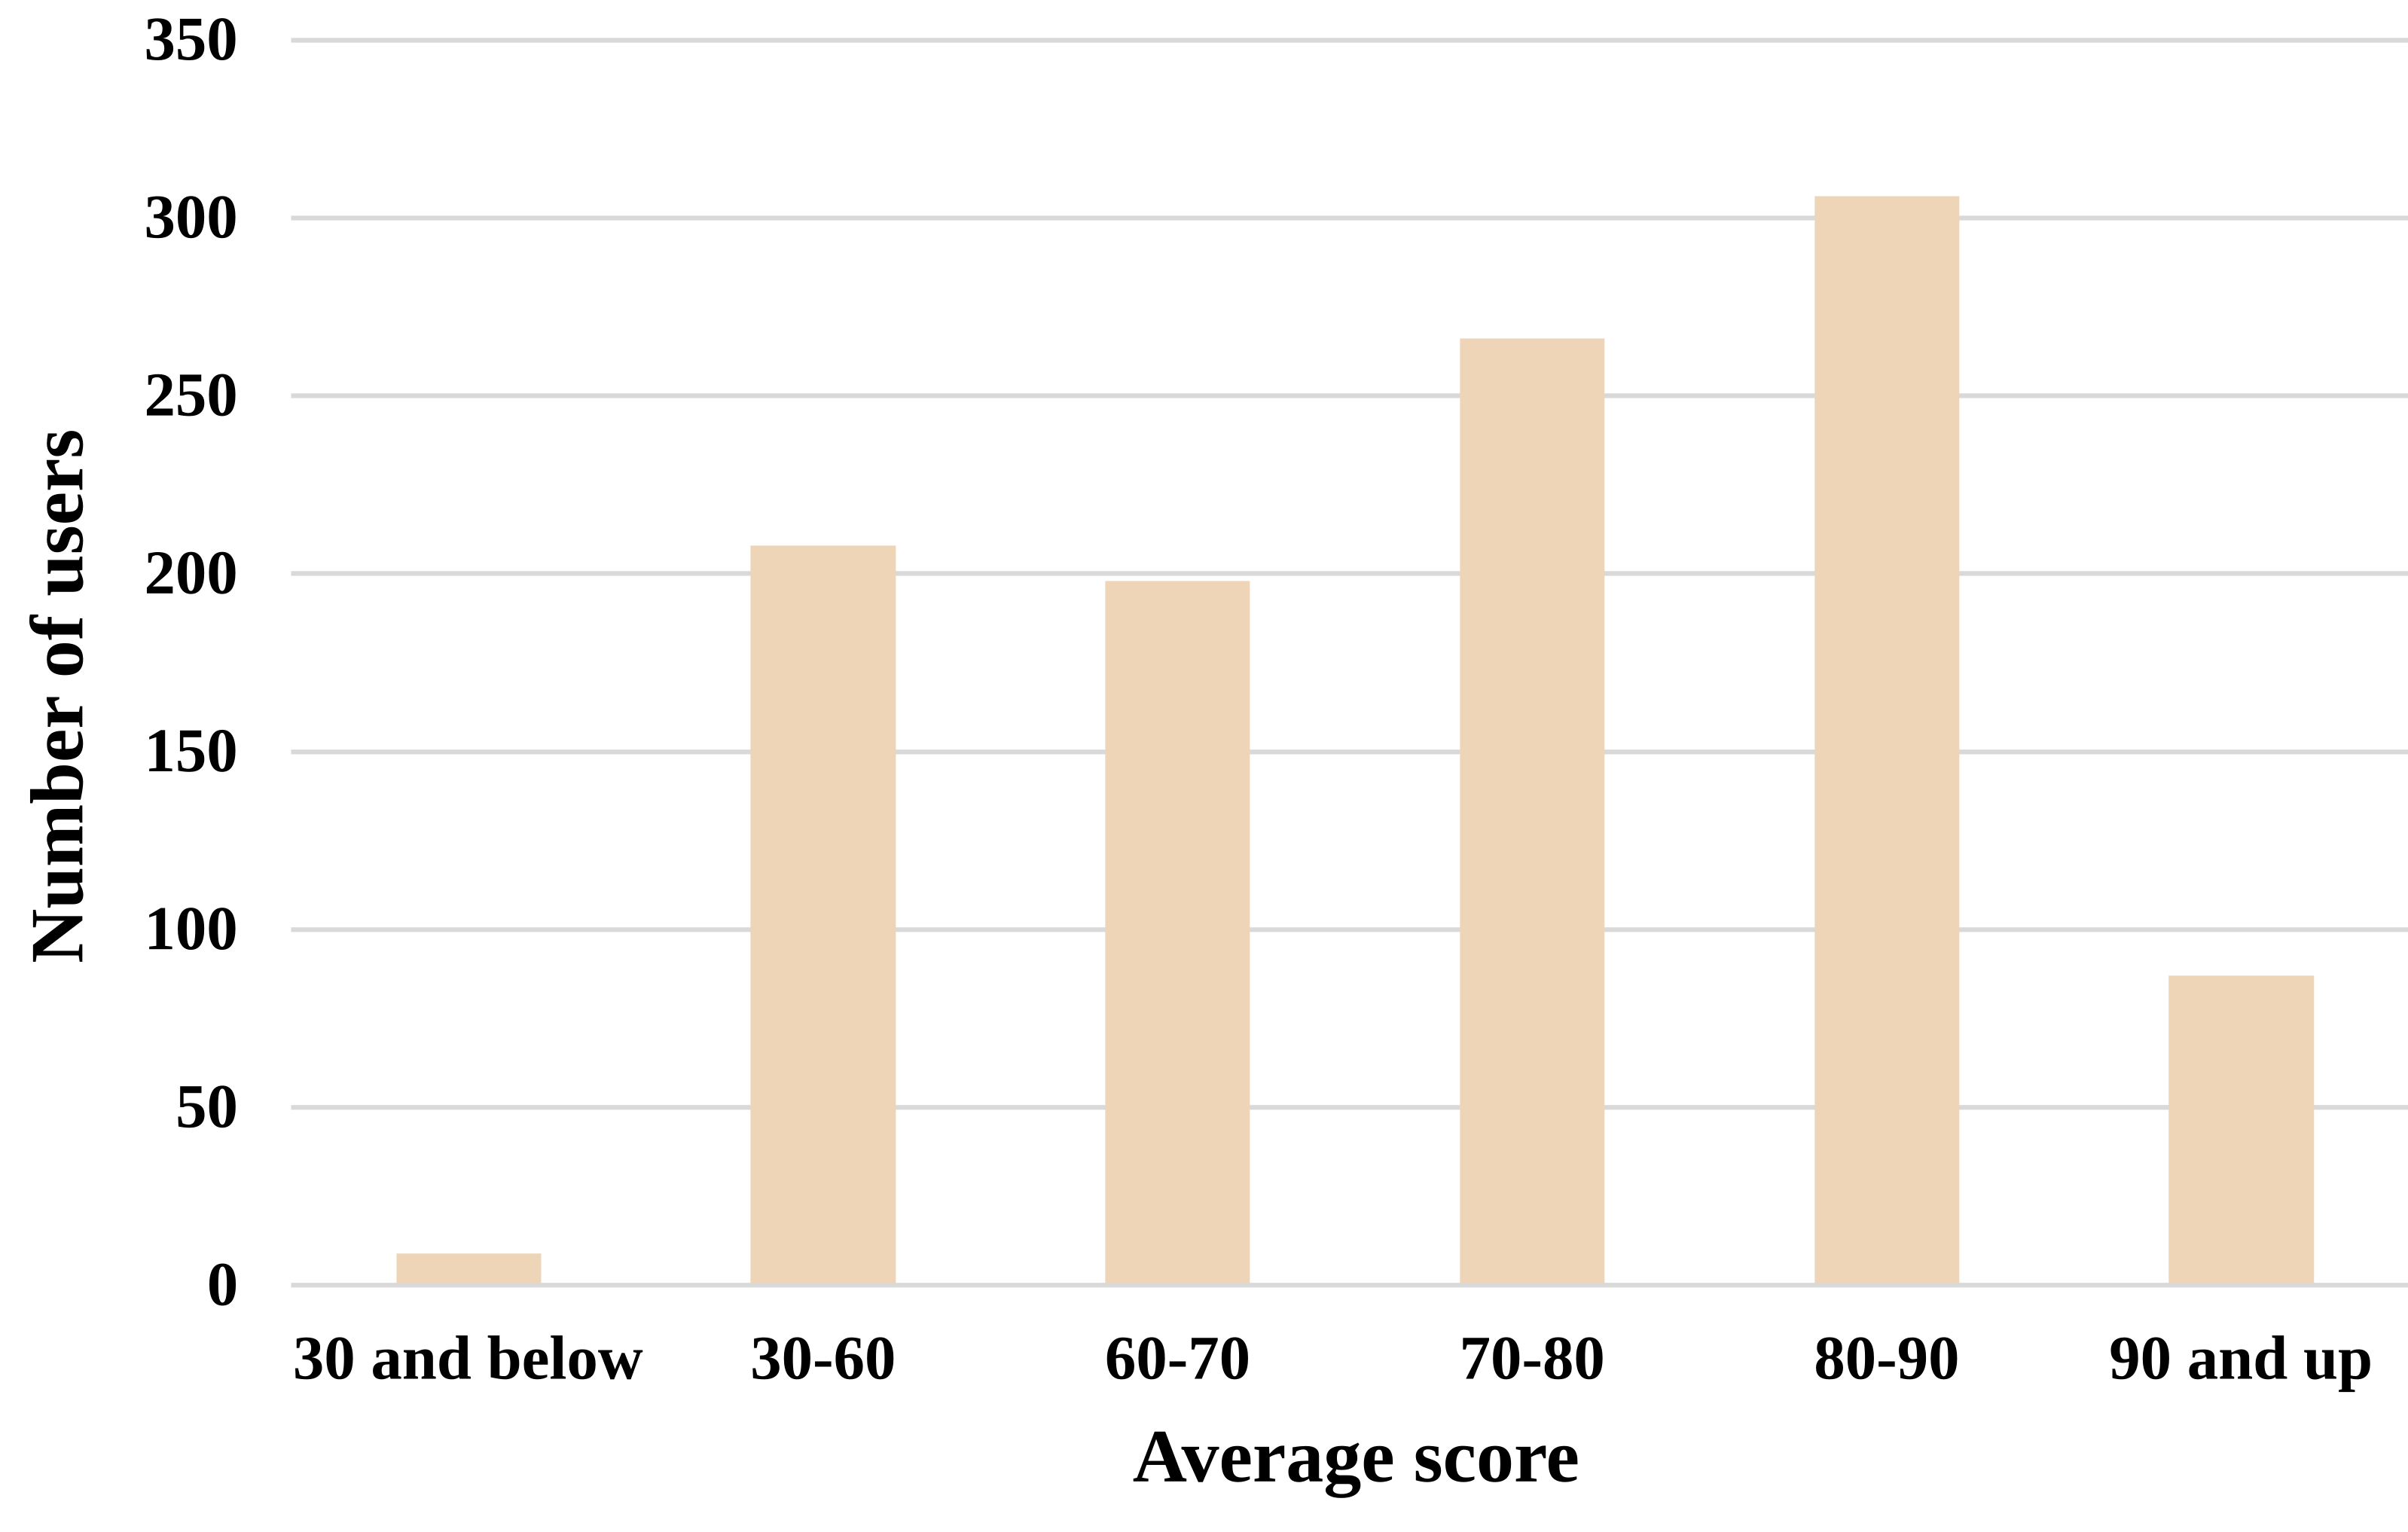 Distribution of the average scores of different users. Horizontal axis: Average score, vertical axis: Number of users.